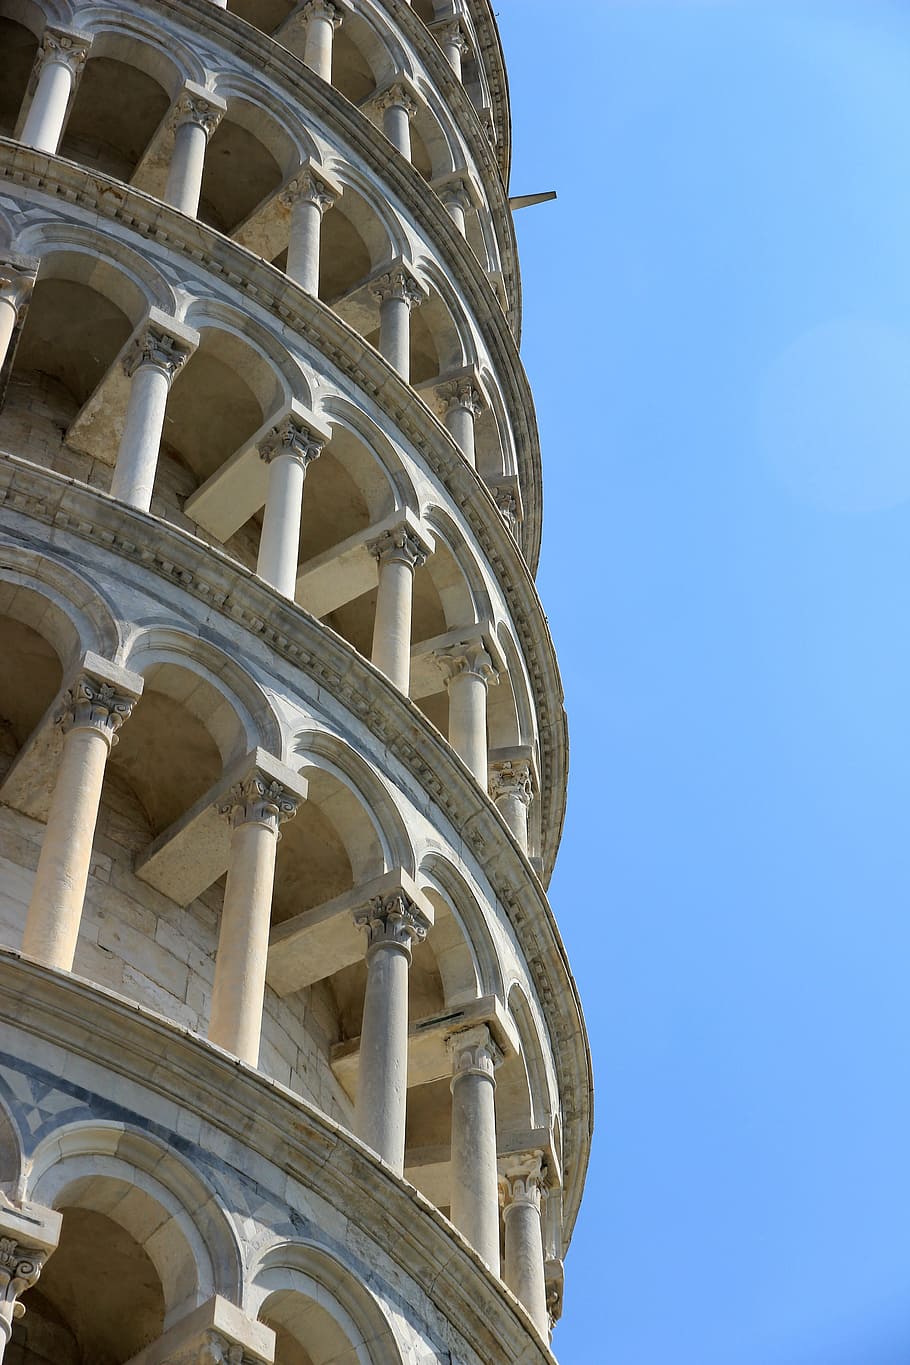 Pisa, Leaning Tower, Italy, Architecture, tuscany, building, facade, campanile, tourism, places of interest